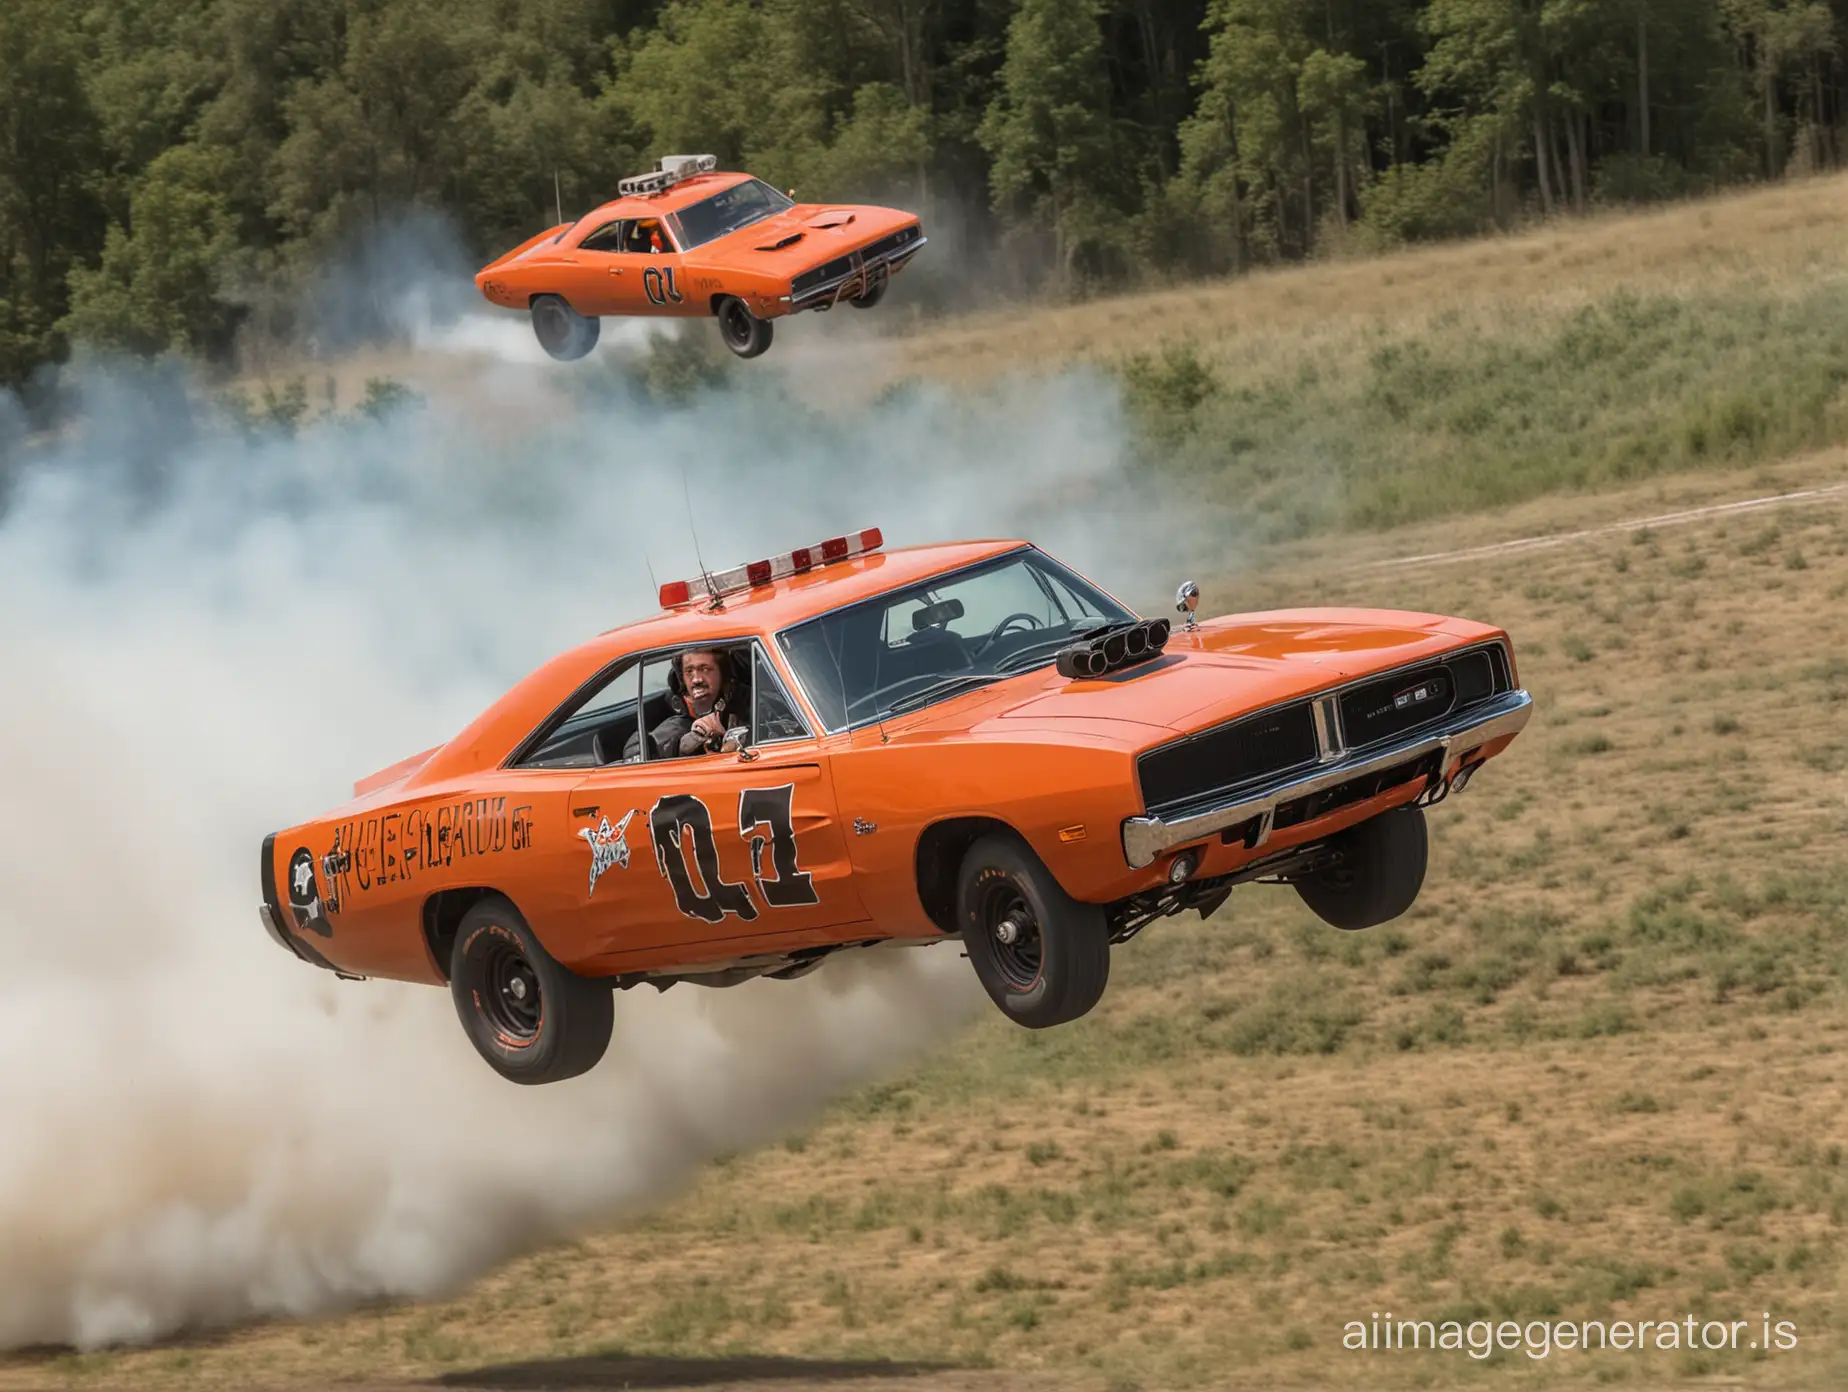 Dukes-of-Hazard-General-Lee-Dodge-Charger-Jumping-Police-Car-1970s-Action-Scene